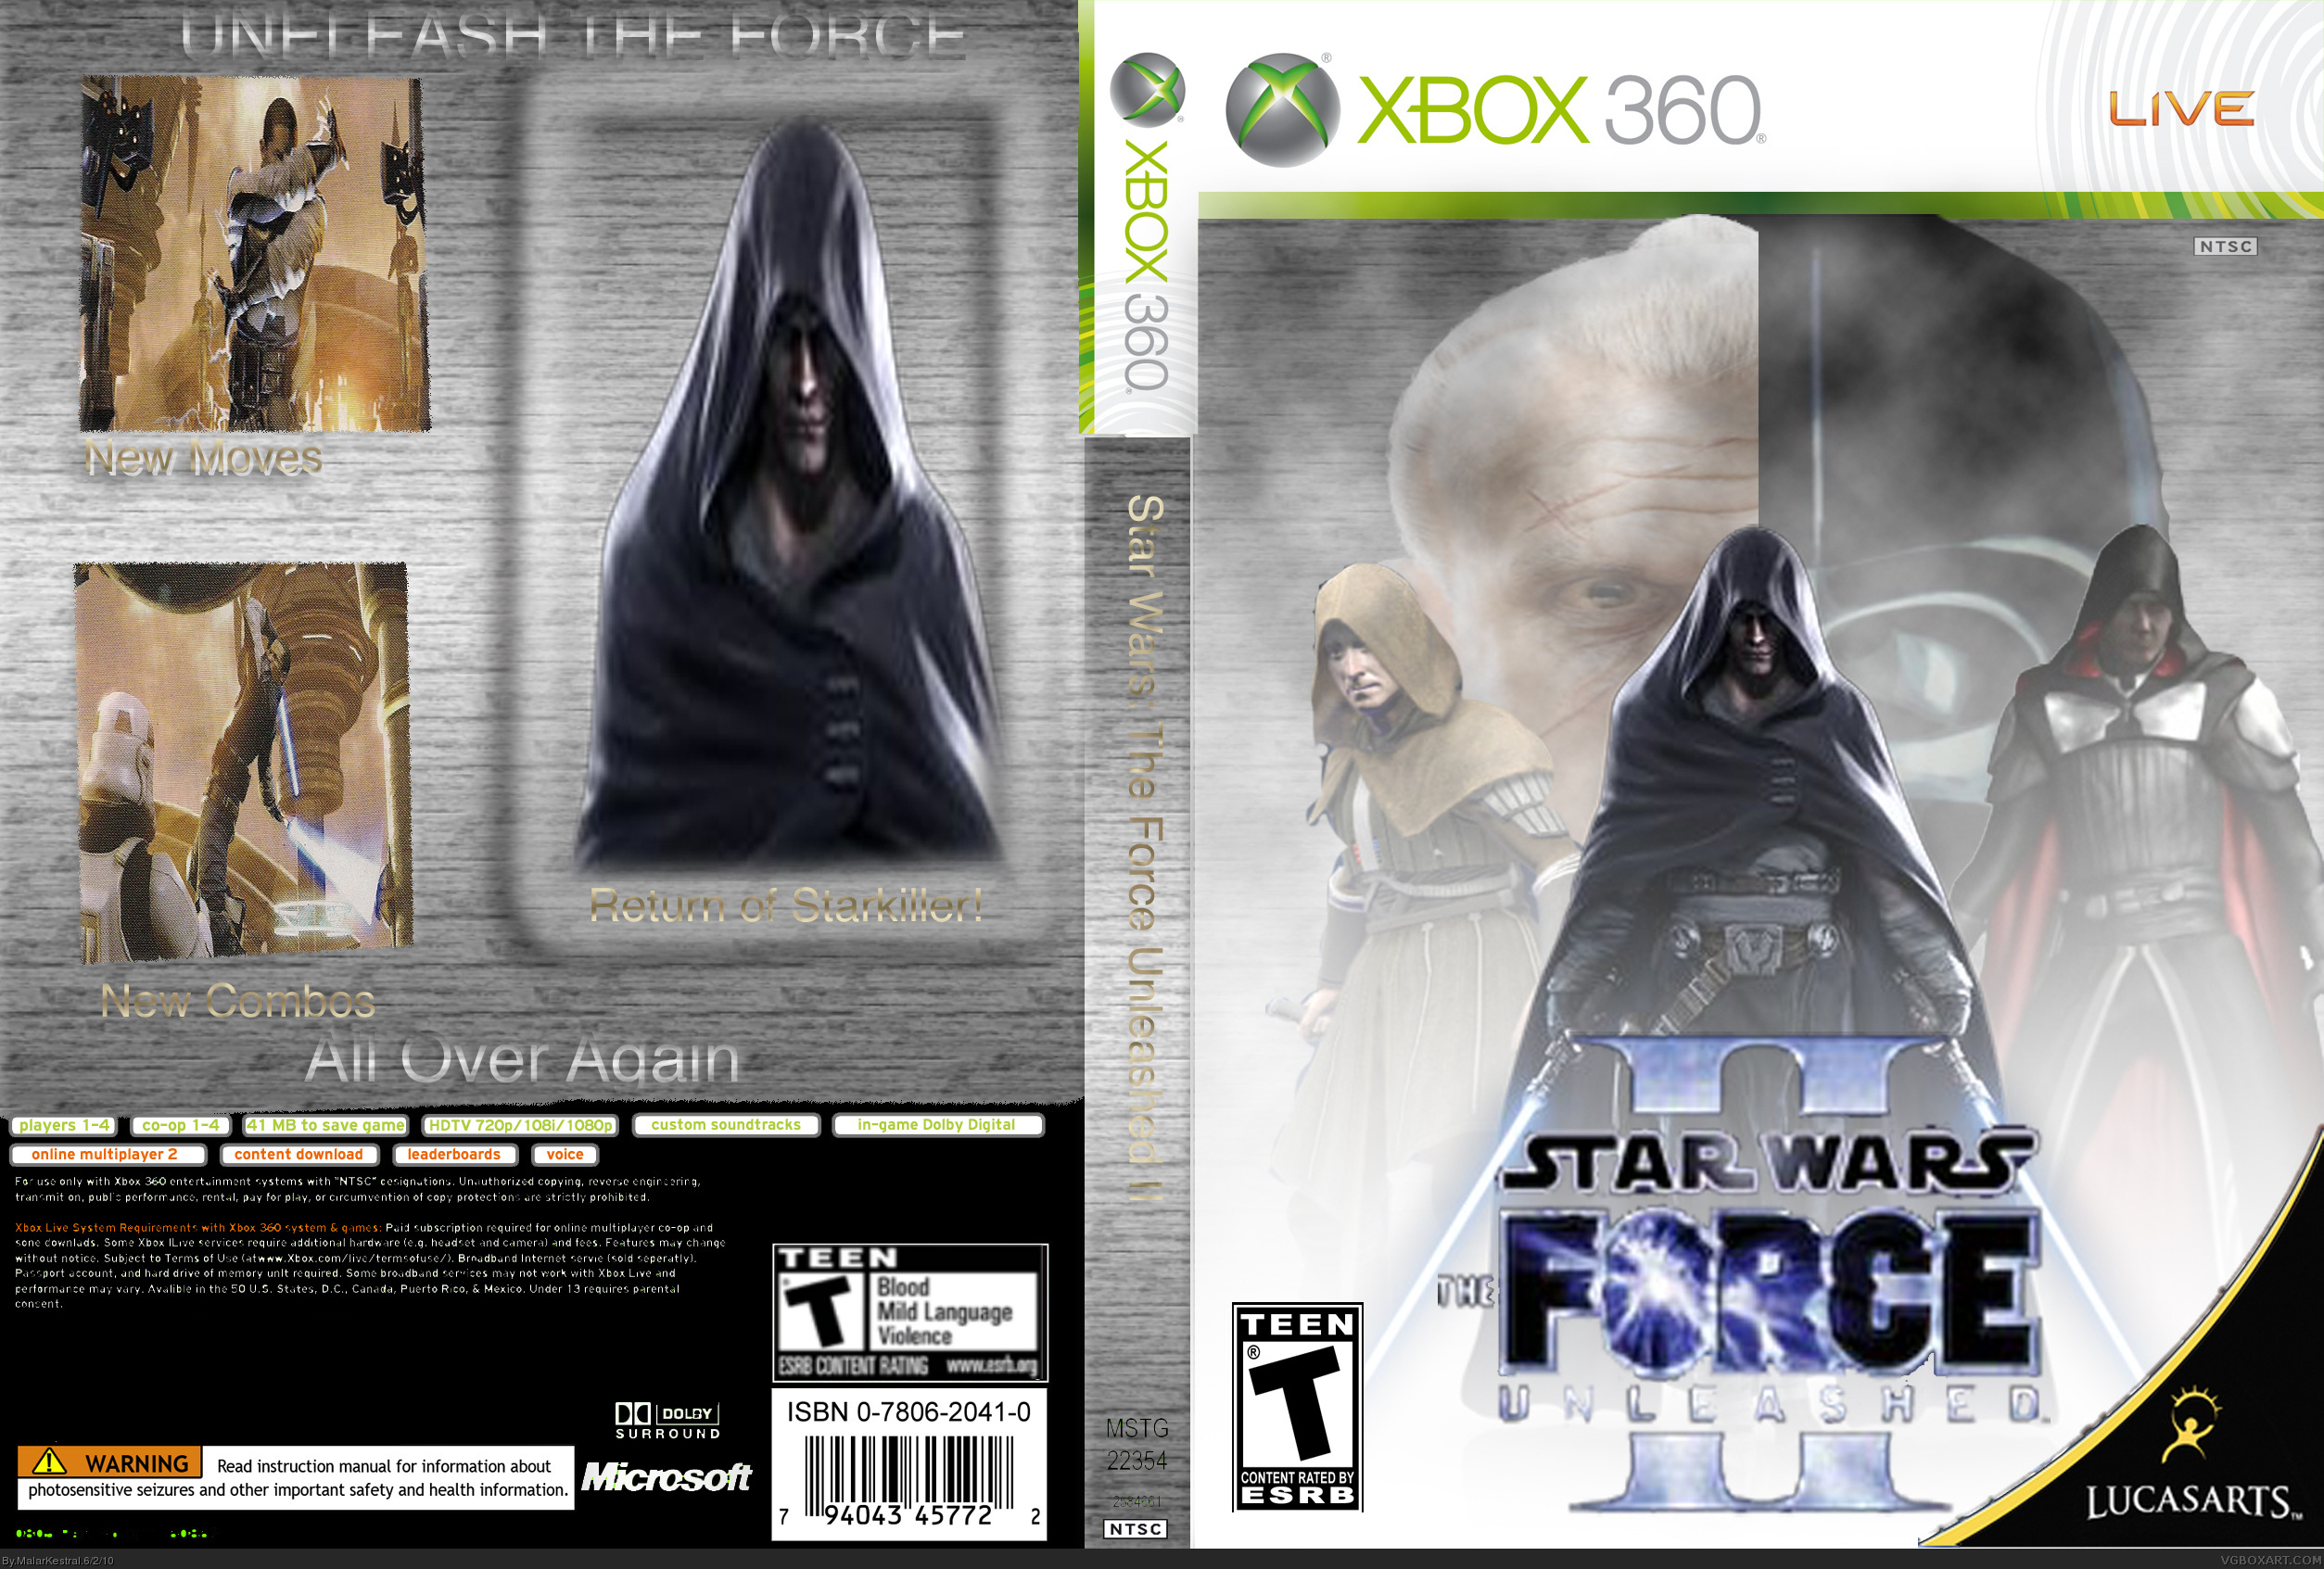 Star Wars: The Force Unleashed II box cover